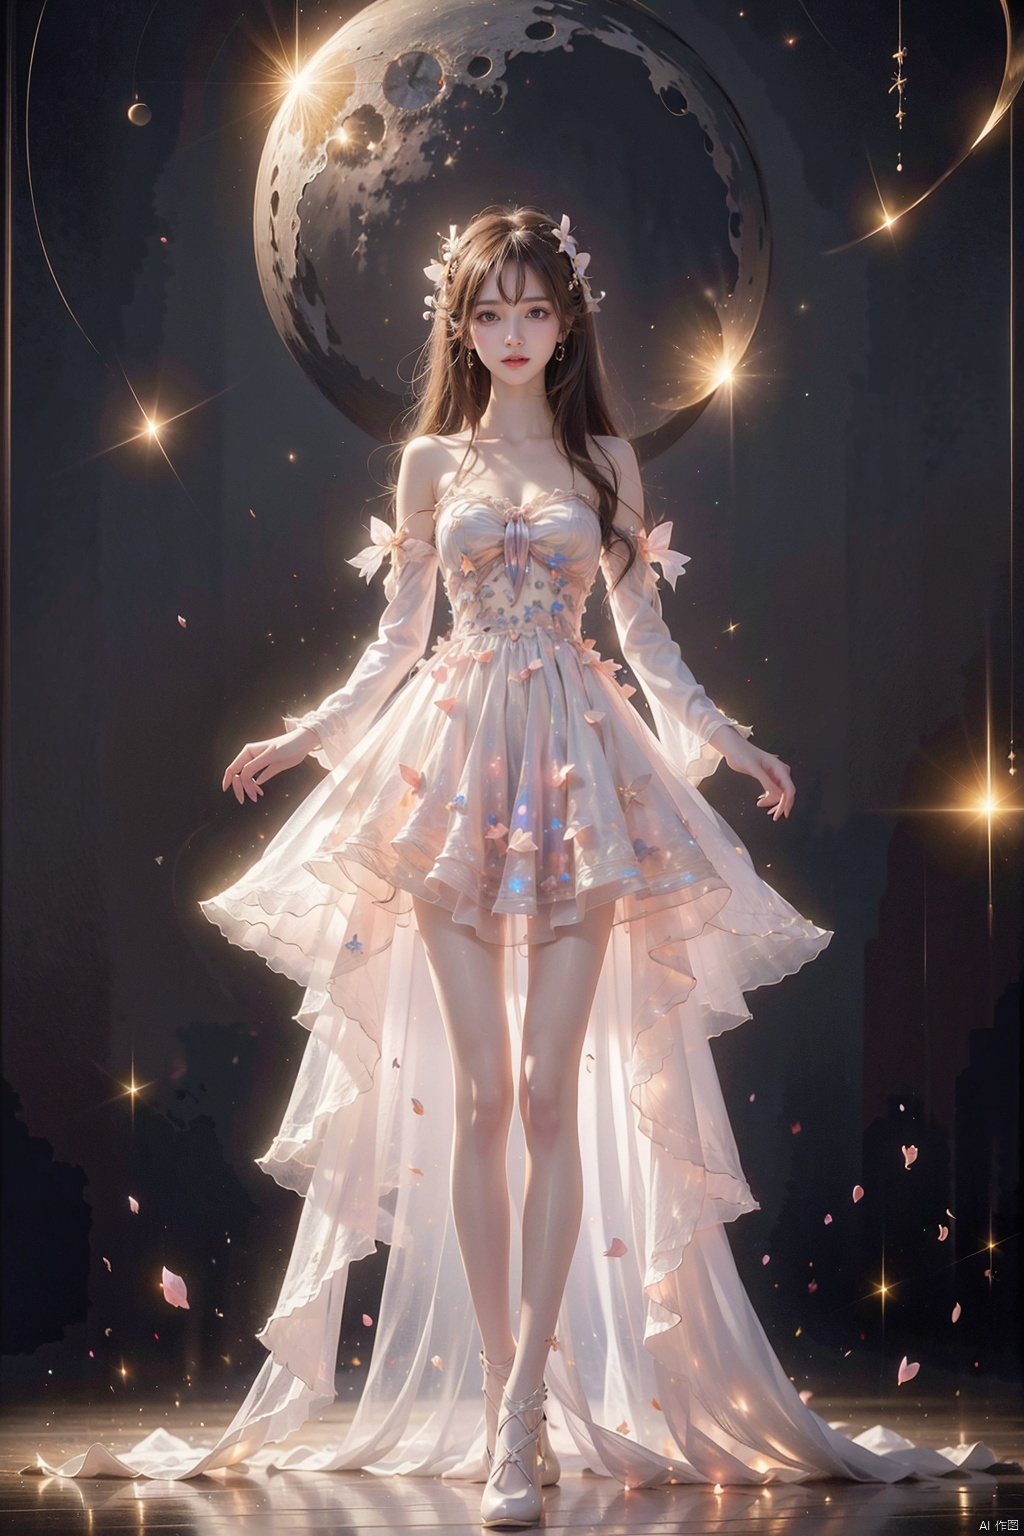  1 girl, Aurora, Bangs, bare shoulders, black shoes, white stockings, blue eyes, boots, bow, chest, (gradual change) , cherry blossoms, City Lights, shut up, clouds, sleeves, clothes, falling flowers, flowers, full moon, (white top hat) , bow, knees, long hair, long sleeves, looking at audience, medium chest, galaxy, Moon, night sky, outdoors, petals, pink flowers, pink roses, railings, roses, rose petals, Meteor, sky, Solo, space, standing, Star (Sky) , star, star print, thigh, long hair, white skirt, white flower, white headdress, blackpantyhose, yifu, hand101, dress, miniJK, xuancaiqun, ((poakl)),kneel